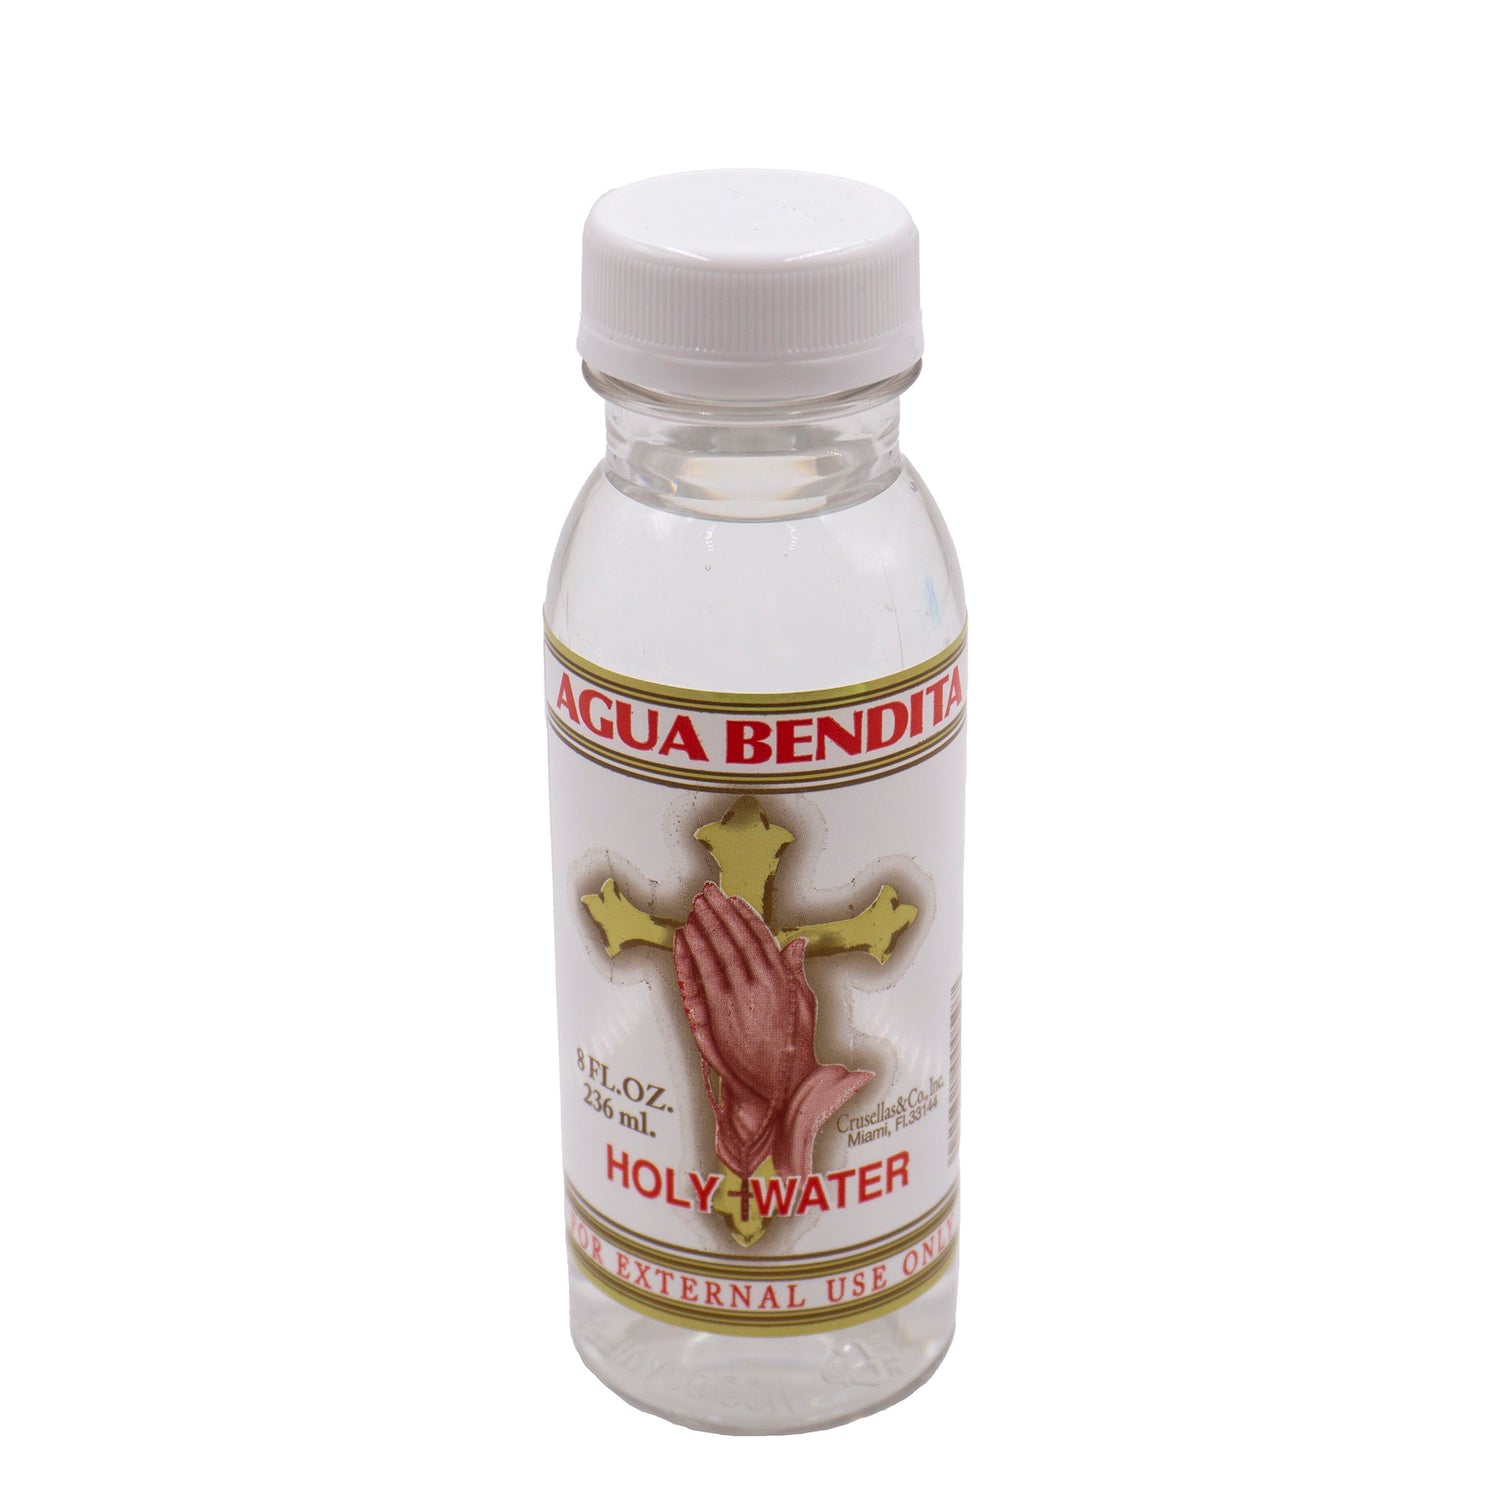 small plastic bottle labeled "agua bendita - holy water."